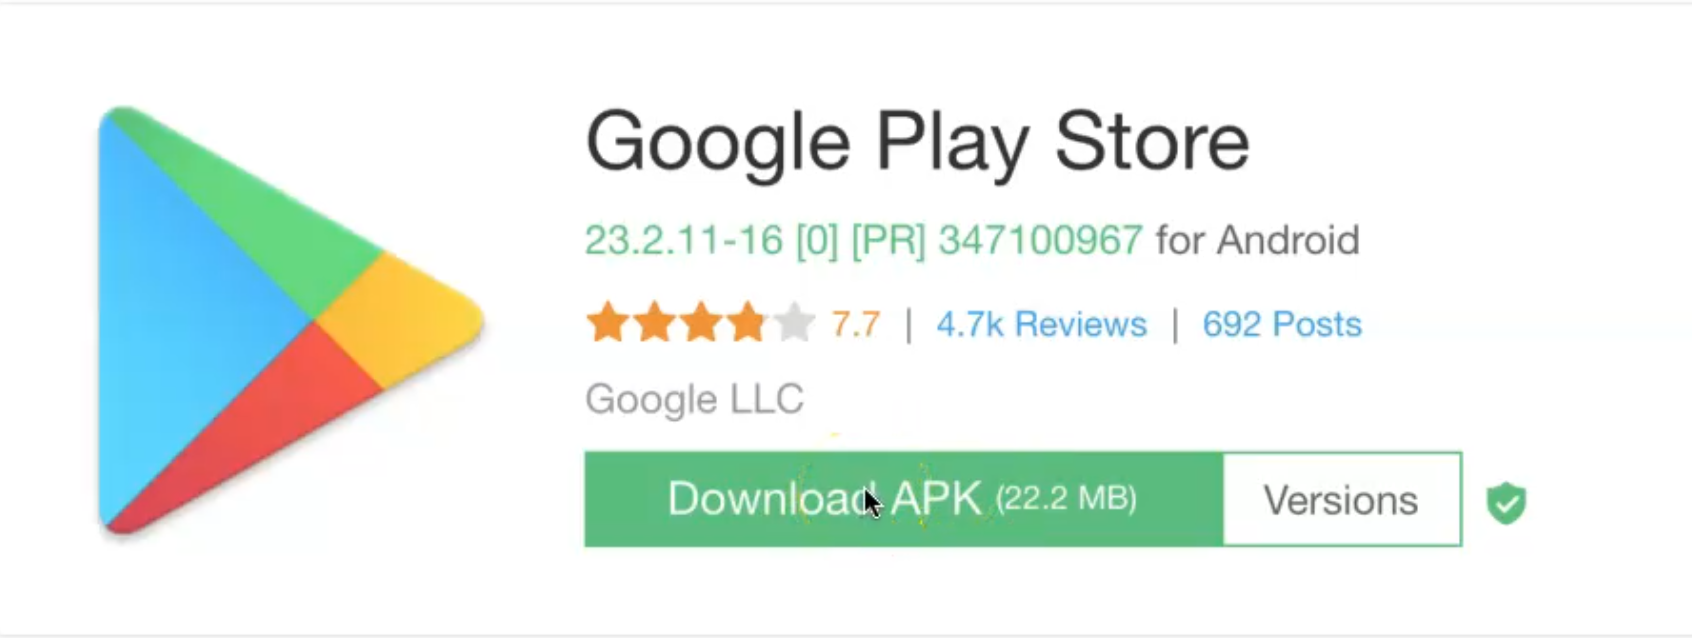 Google Play. Google Play Store. Google Play Маркет. Android Play Store.